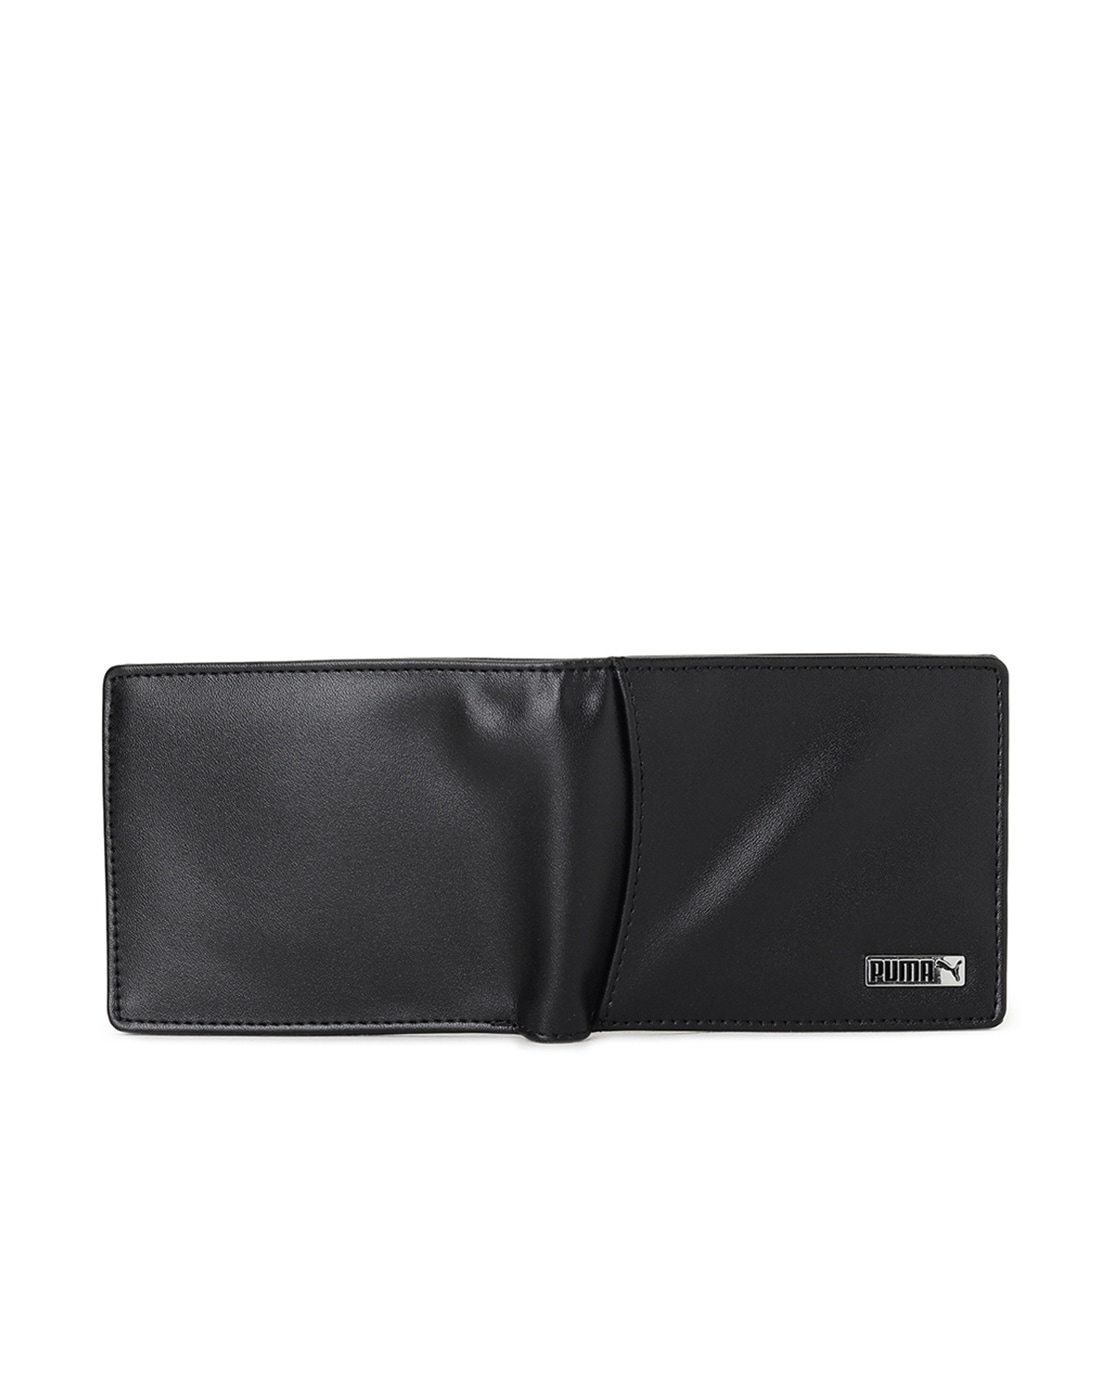 Buy Puma Wallets Online In India At Best Price Offers | Tata CLiQ